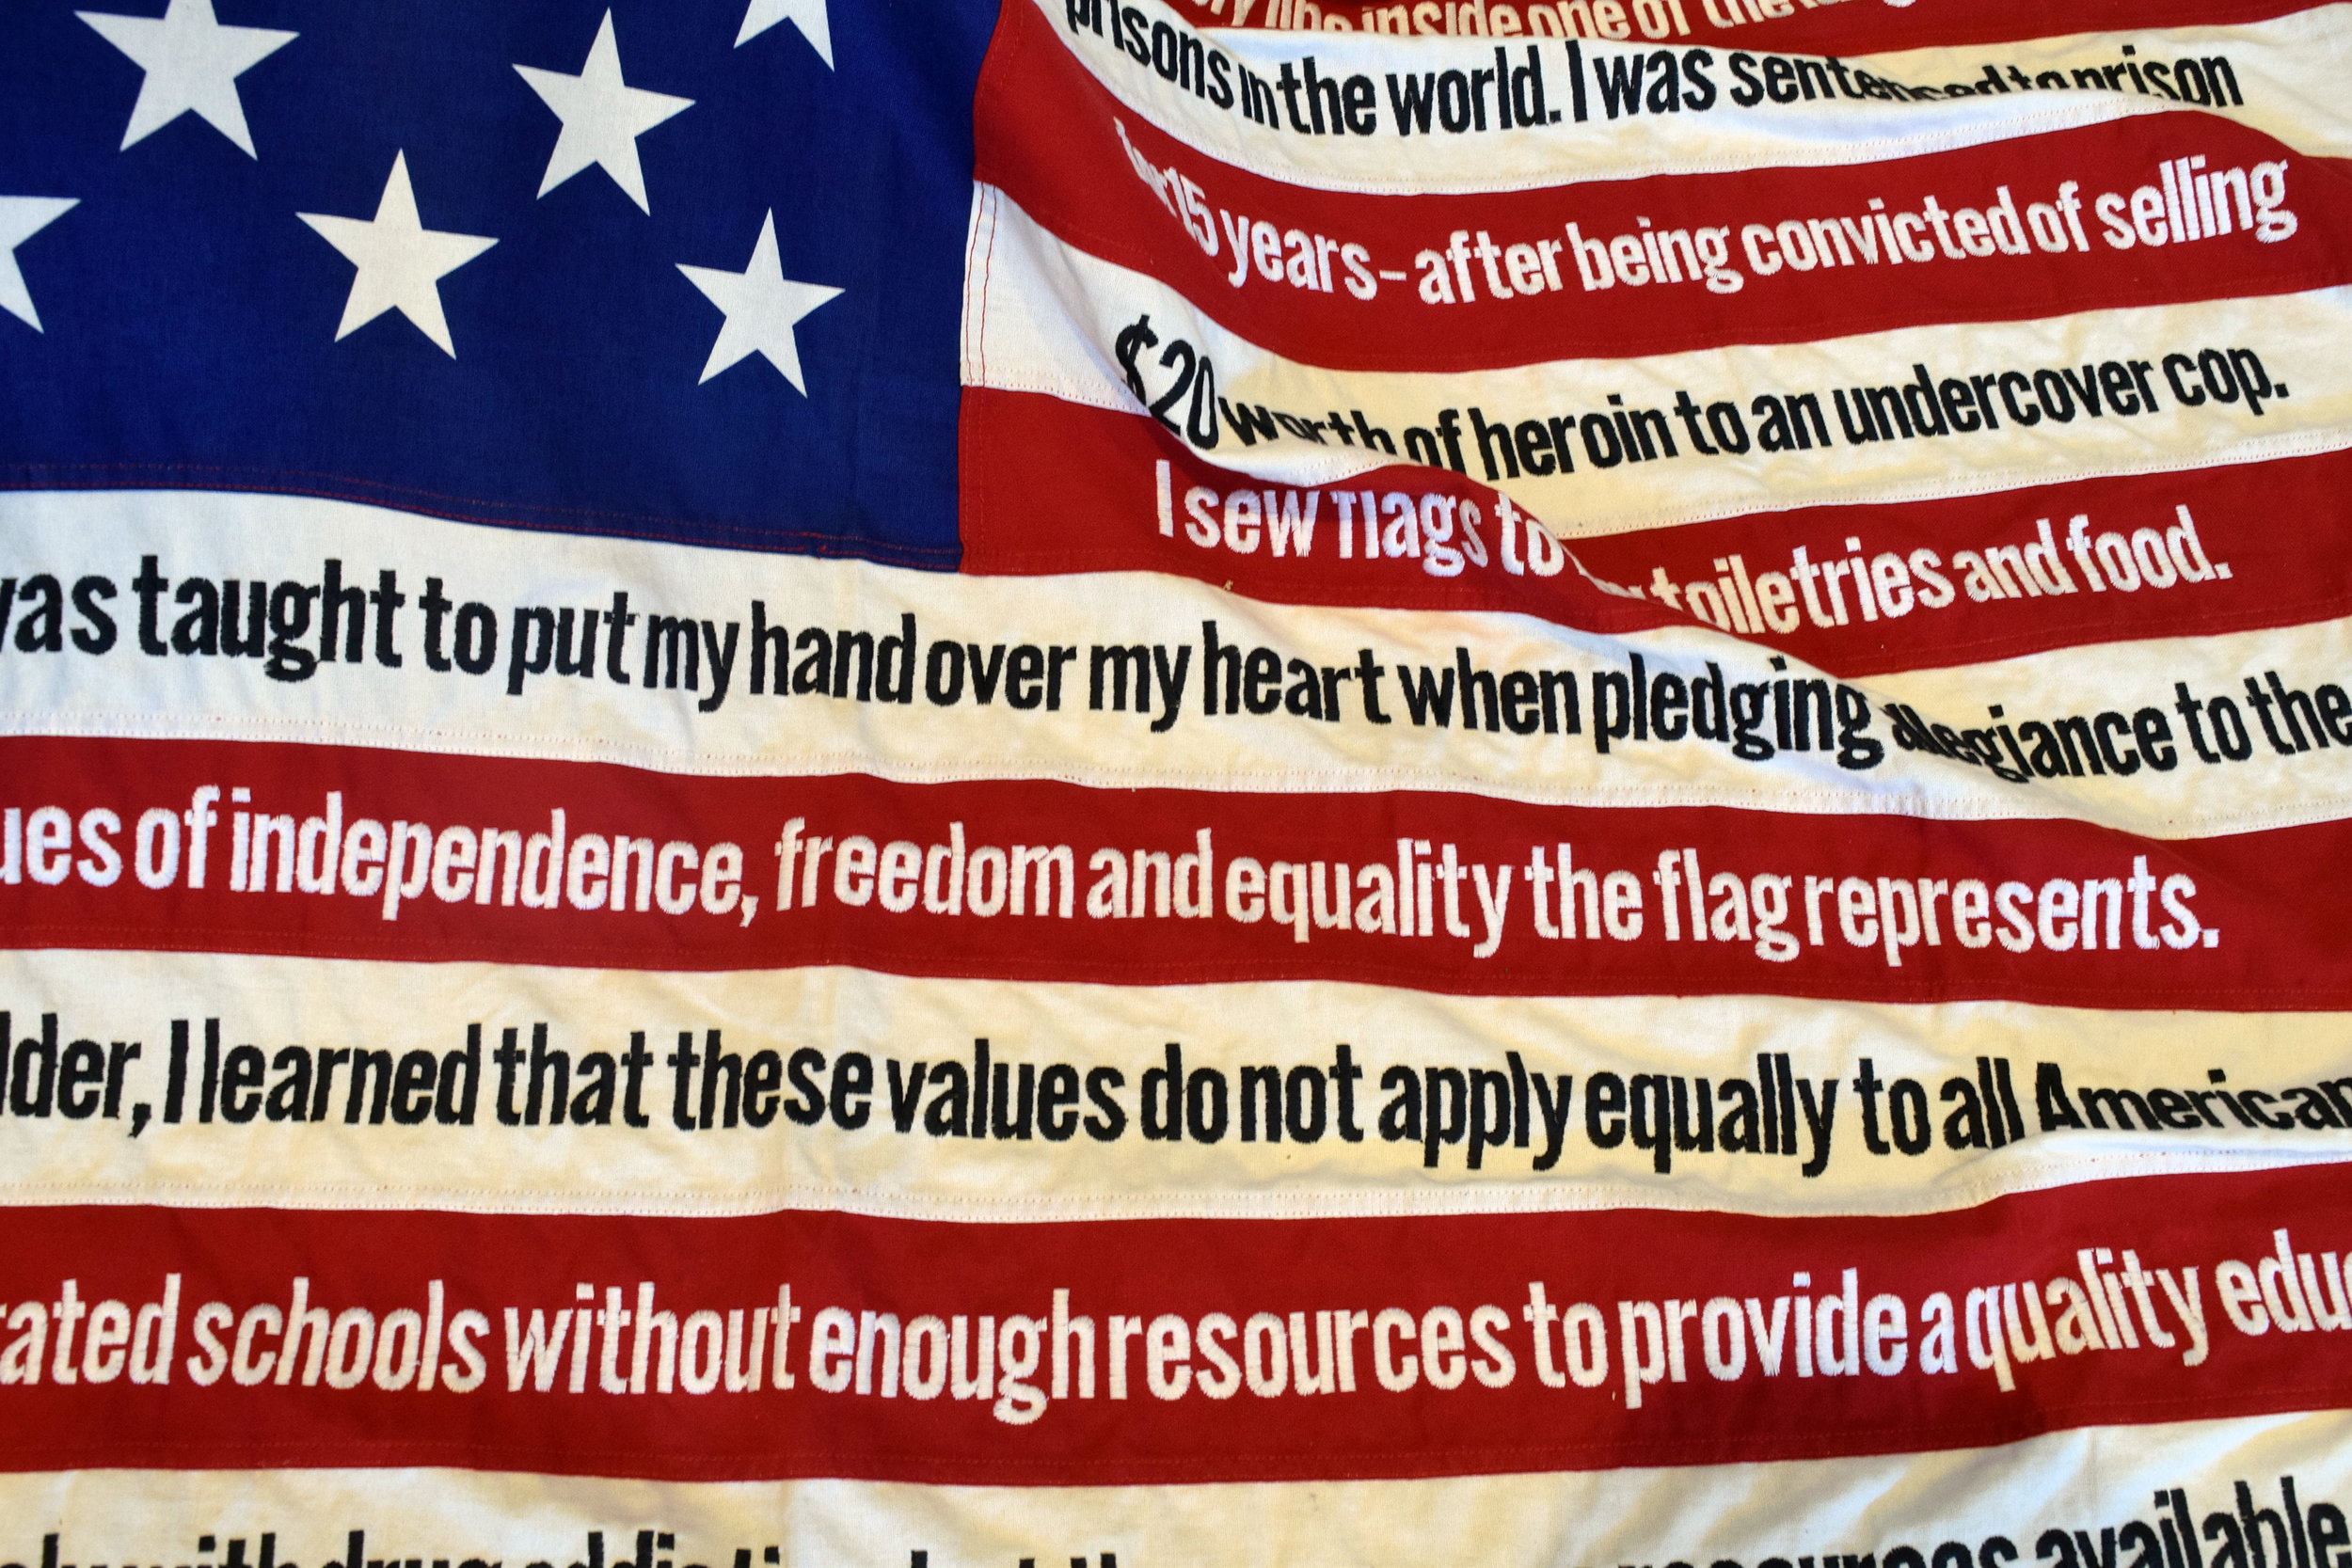 The American Flag is shown with words printed on it.